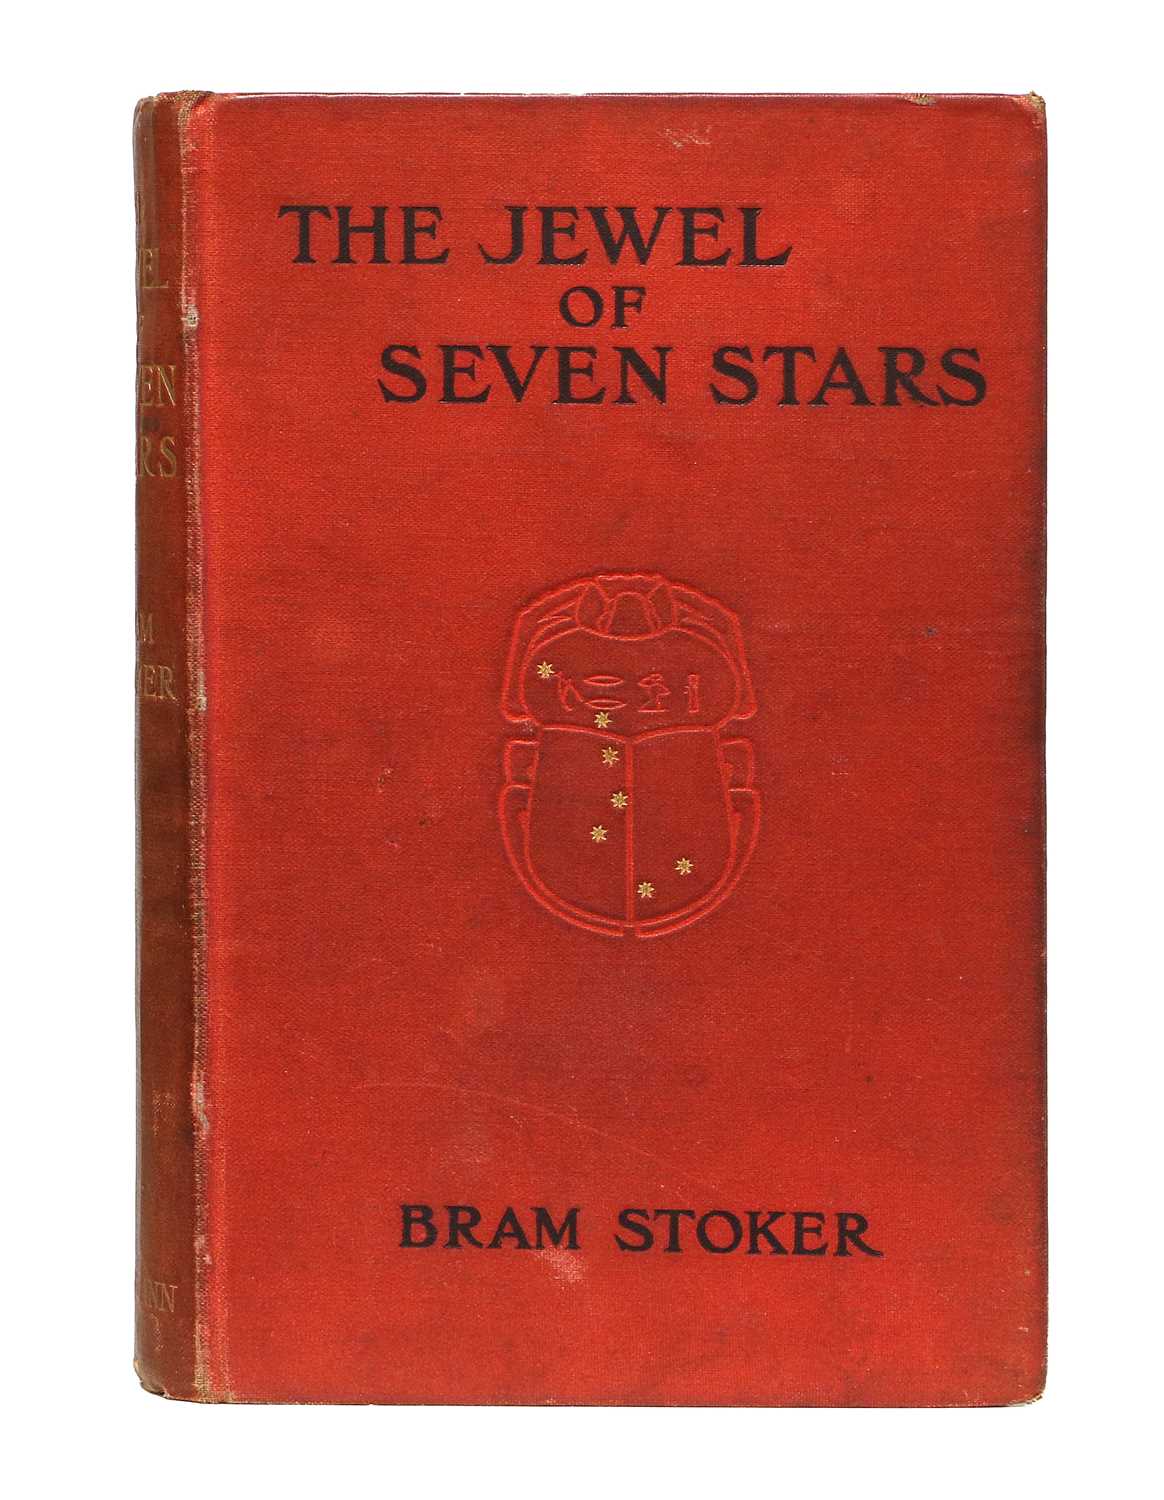 Stoker (Bram). The Jewel of Seven Stars. William Heinemann, 1903, first edition, tanning to pages, - Image 3 of 3